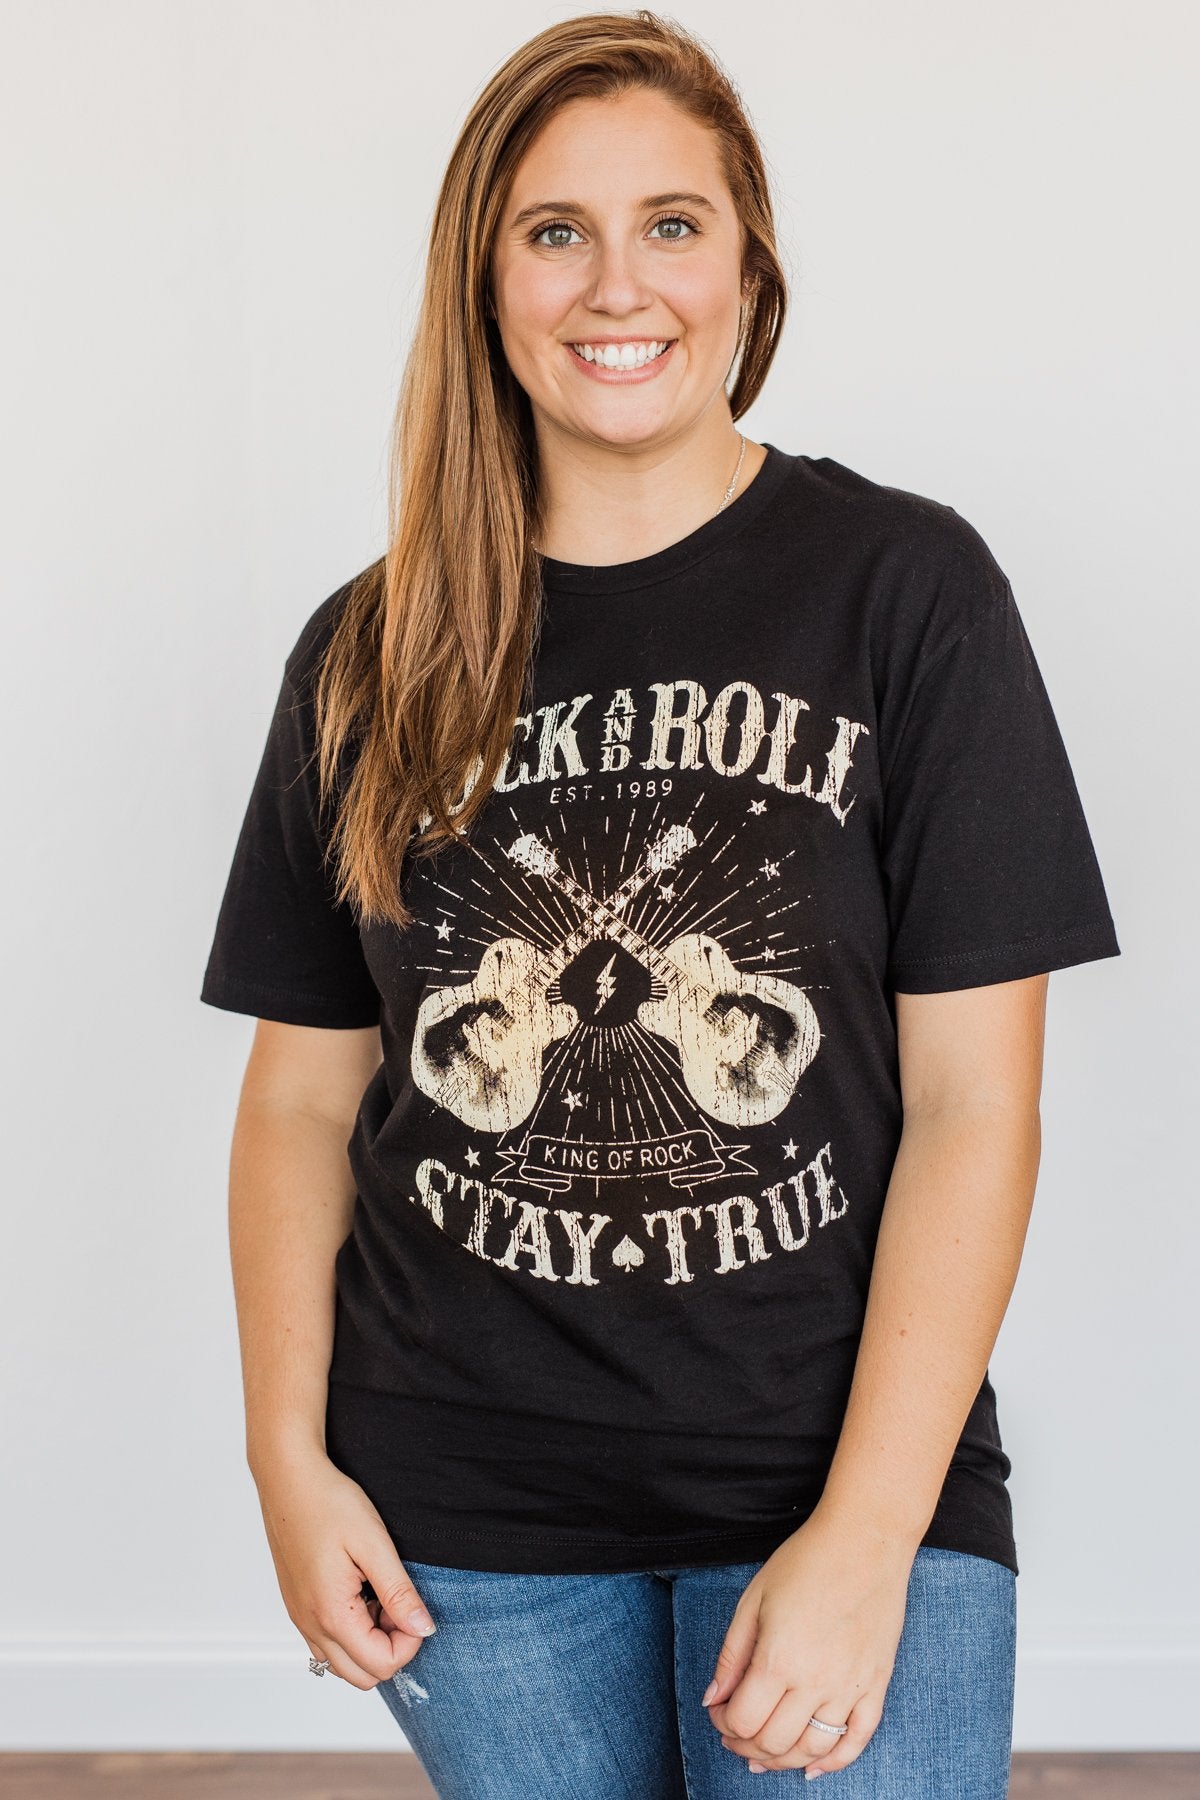 "Rock And Roll, Stay True" Graphic Top- Black